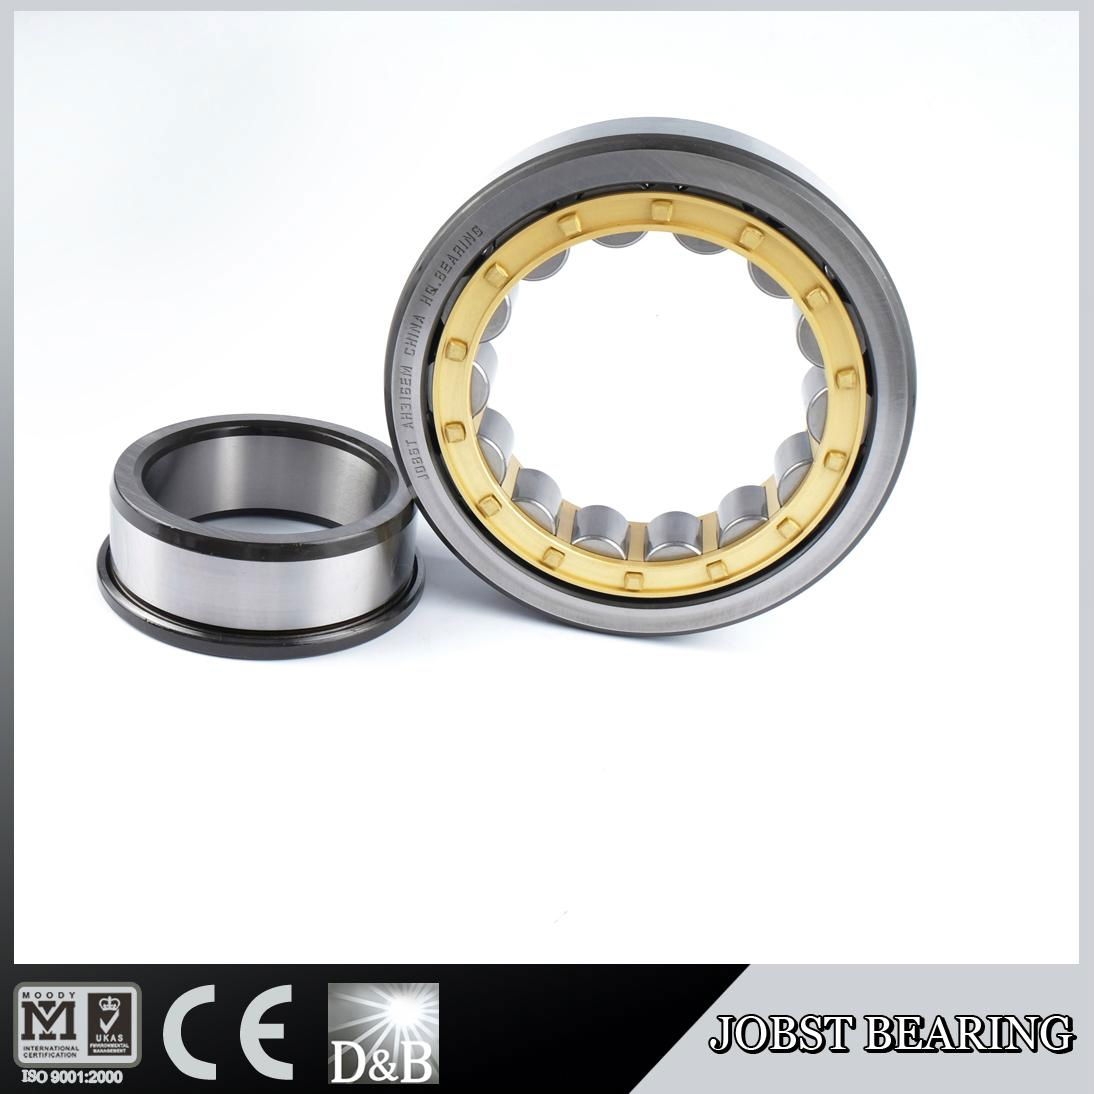 HIGH PRECISION CYLINDRICAL ROLLER BEARING AH 316M/317 